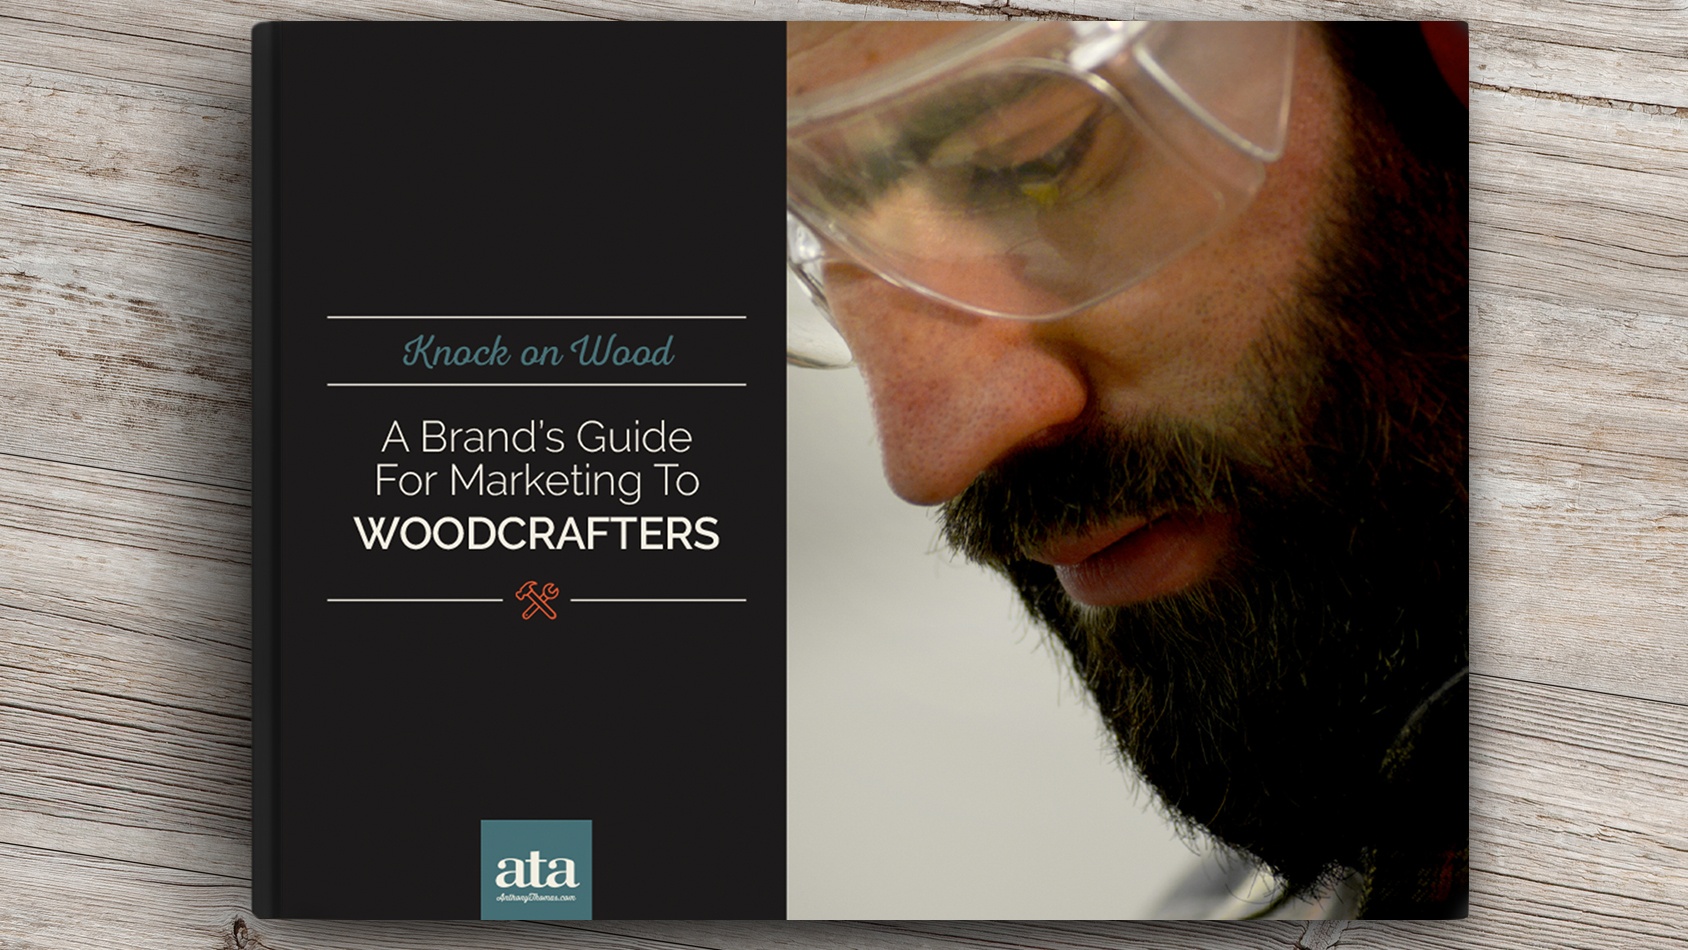 Knock On Wood: A Brand's Guide for Marketing to Woodcrafters